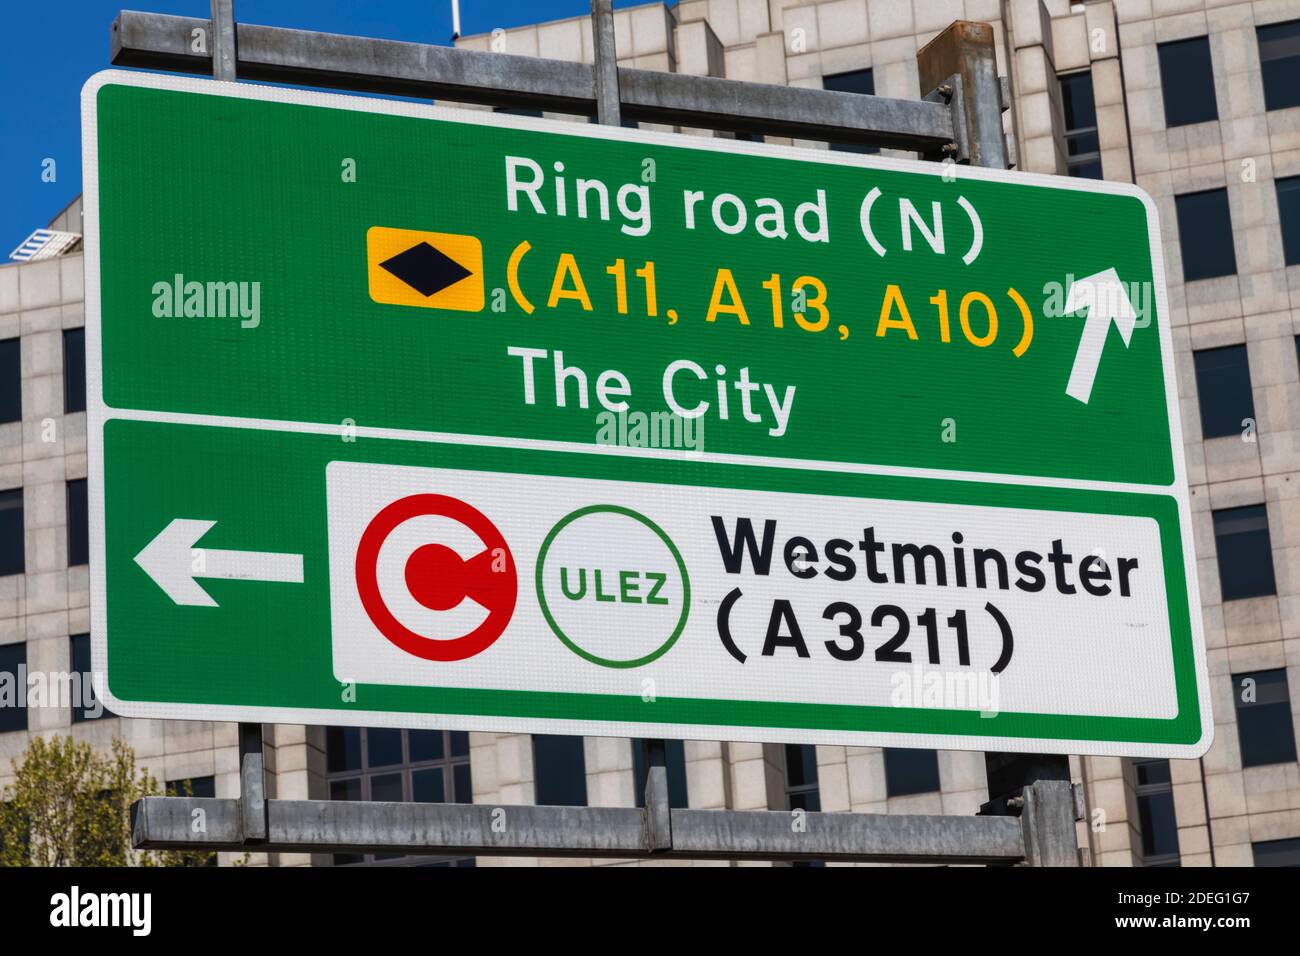 England, London, Ring Road Sign Indicating Congestion and ULEZ Zones Stock Photo